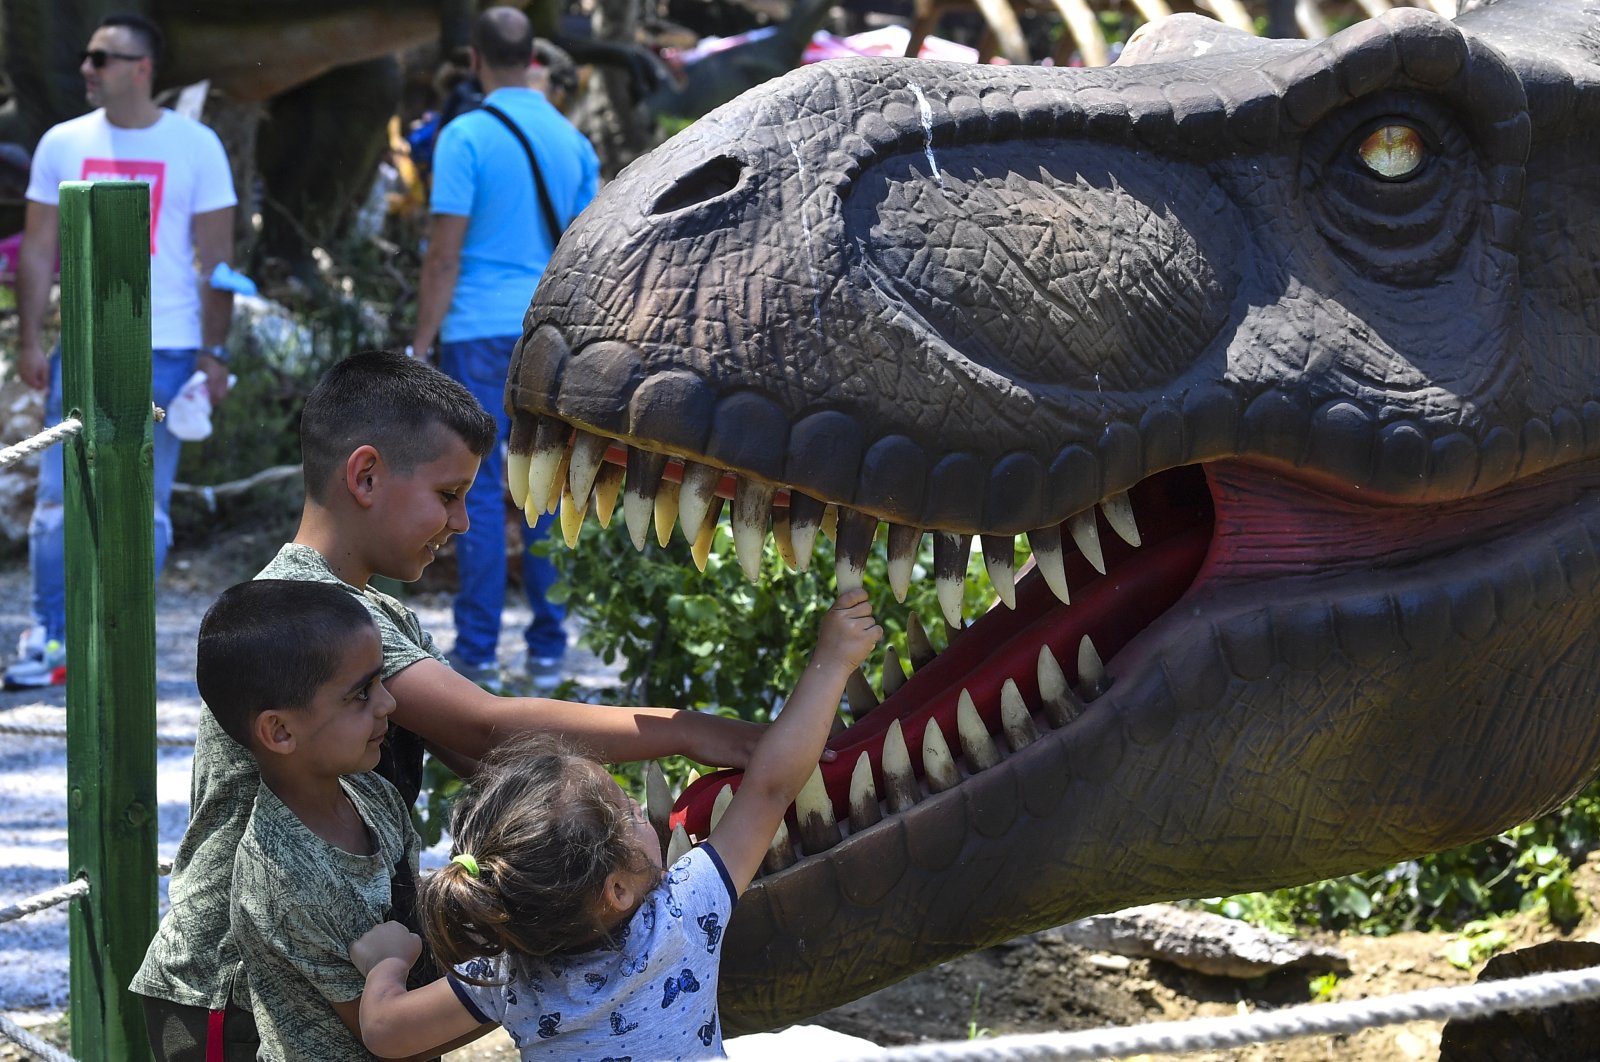 Children play with and between the replicas of dinosaurs in the newly opened Dino Park in the zoo in Skopje, Republic of North Macedonia, June 5, 2021. (EPA Photo)